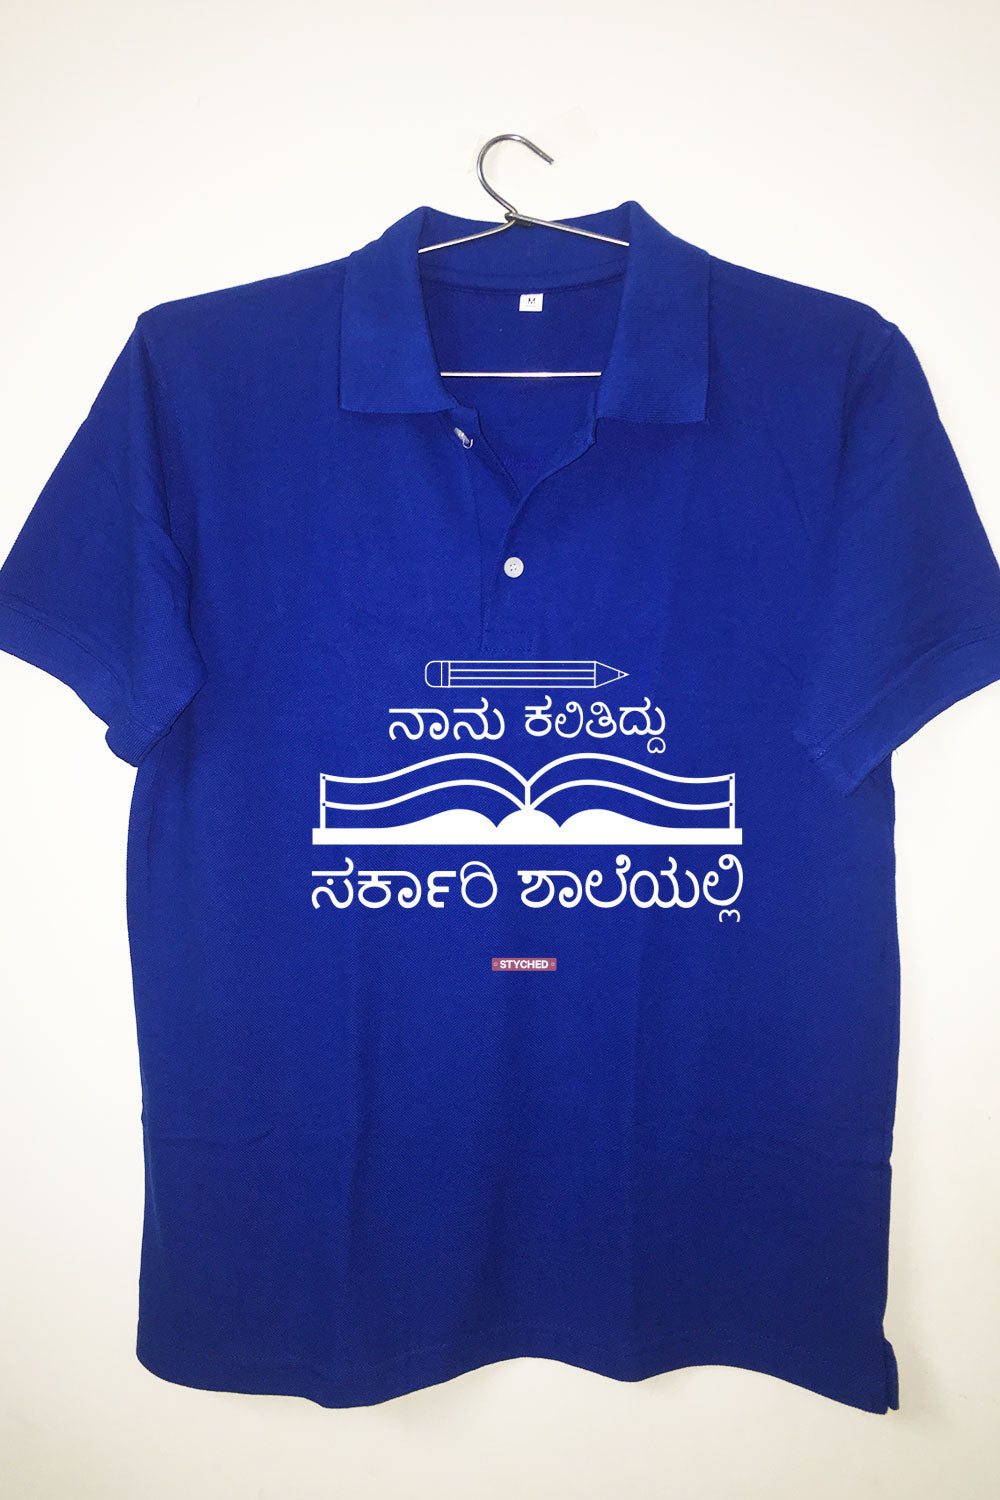 Save Govt. Schools Movement Tee - Styched in India Graphic Polo T-Shirt Blue Color